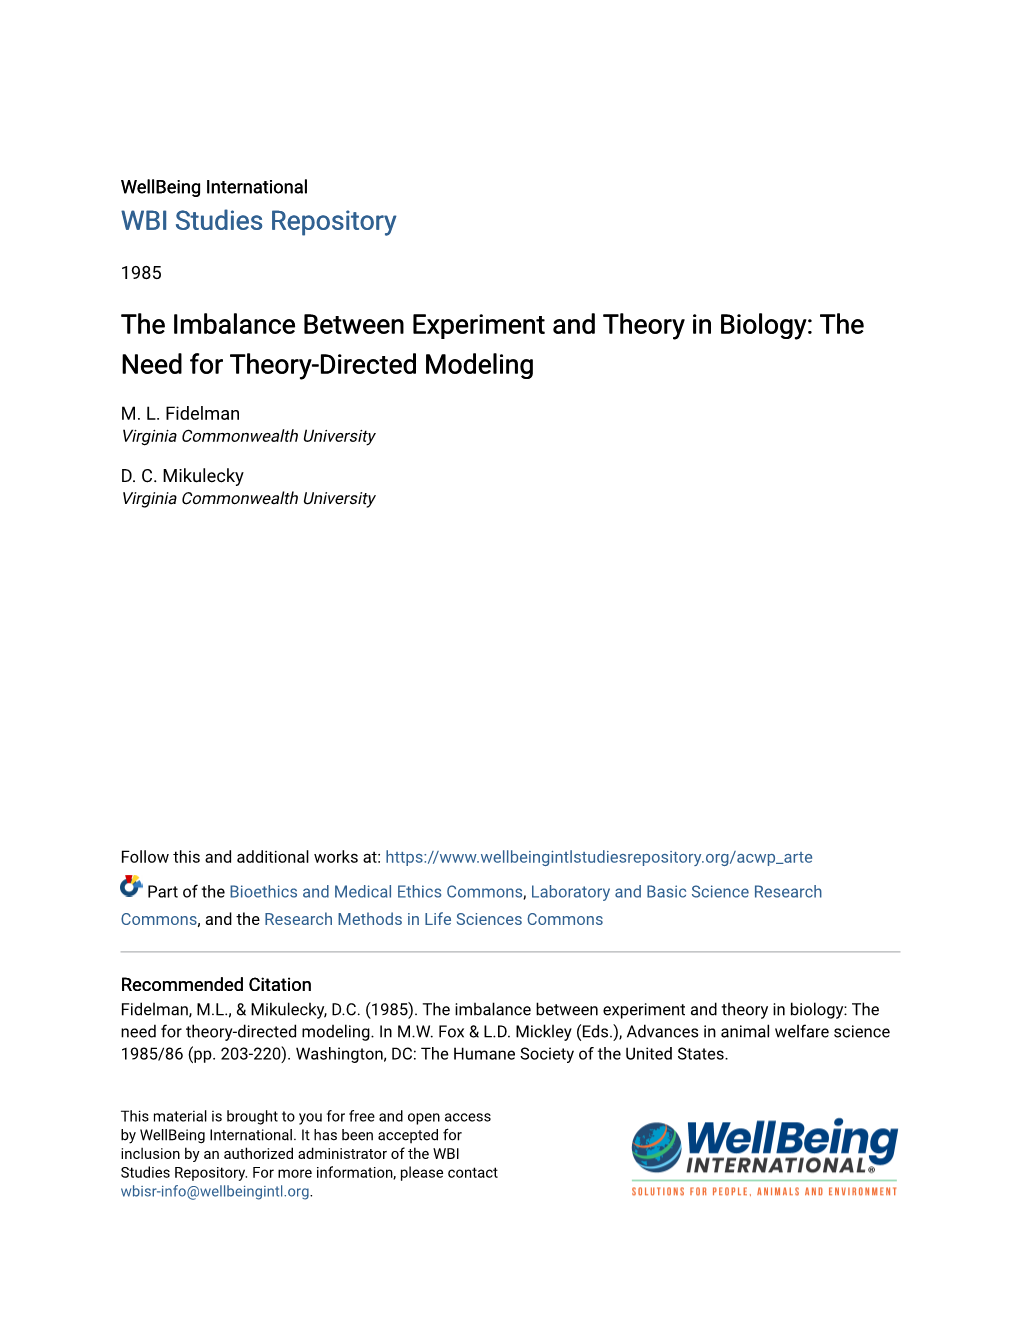 The Imbalance Between Experiment and Theory in Biology: the Need for Theory-Directed Modeling